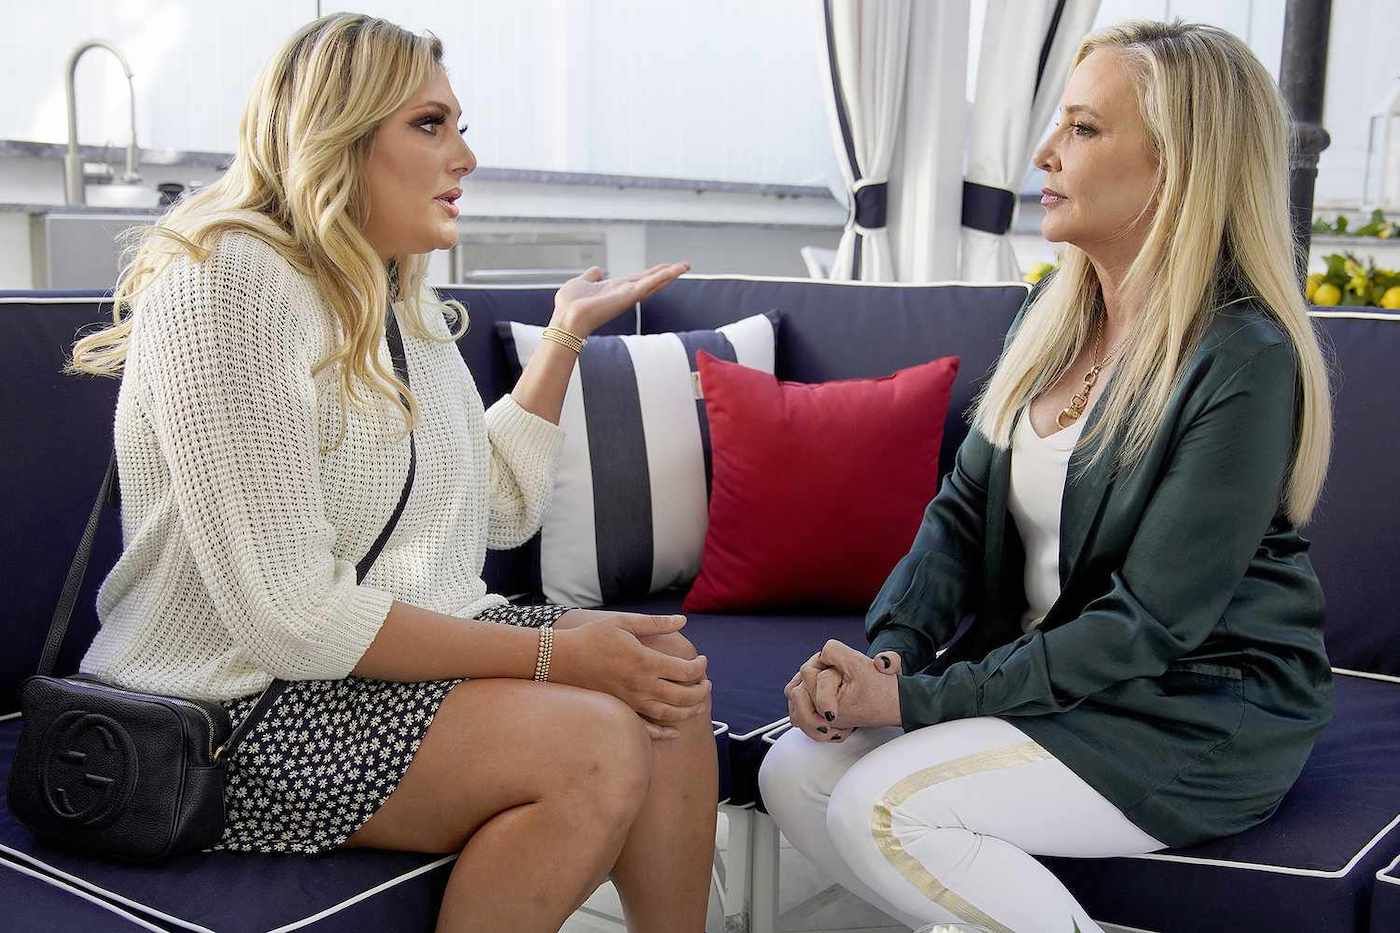 Drama Unleashed: Tensions Boil Over in ‘Real Housewives of Orange County’ Reunion – Will Gina Kirschenheiter Exit?